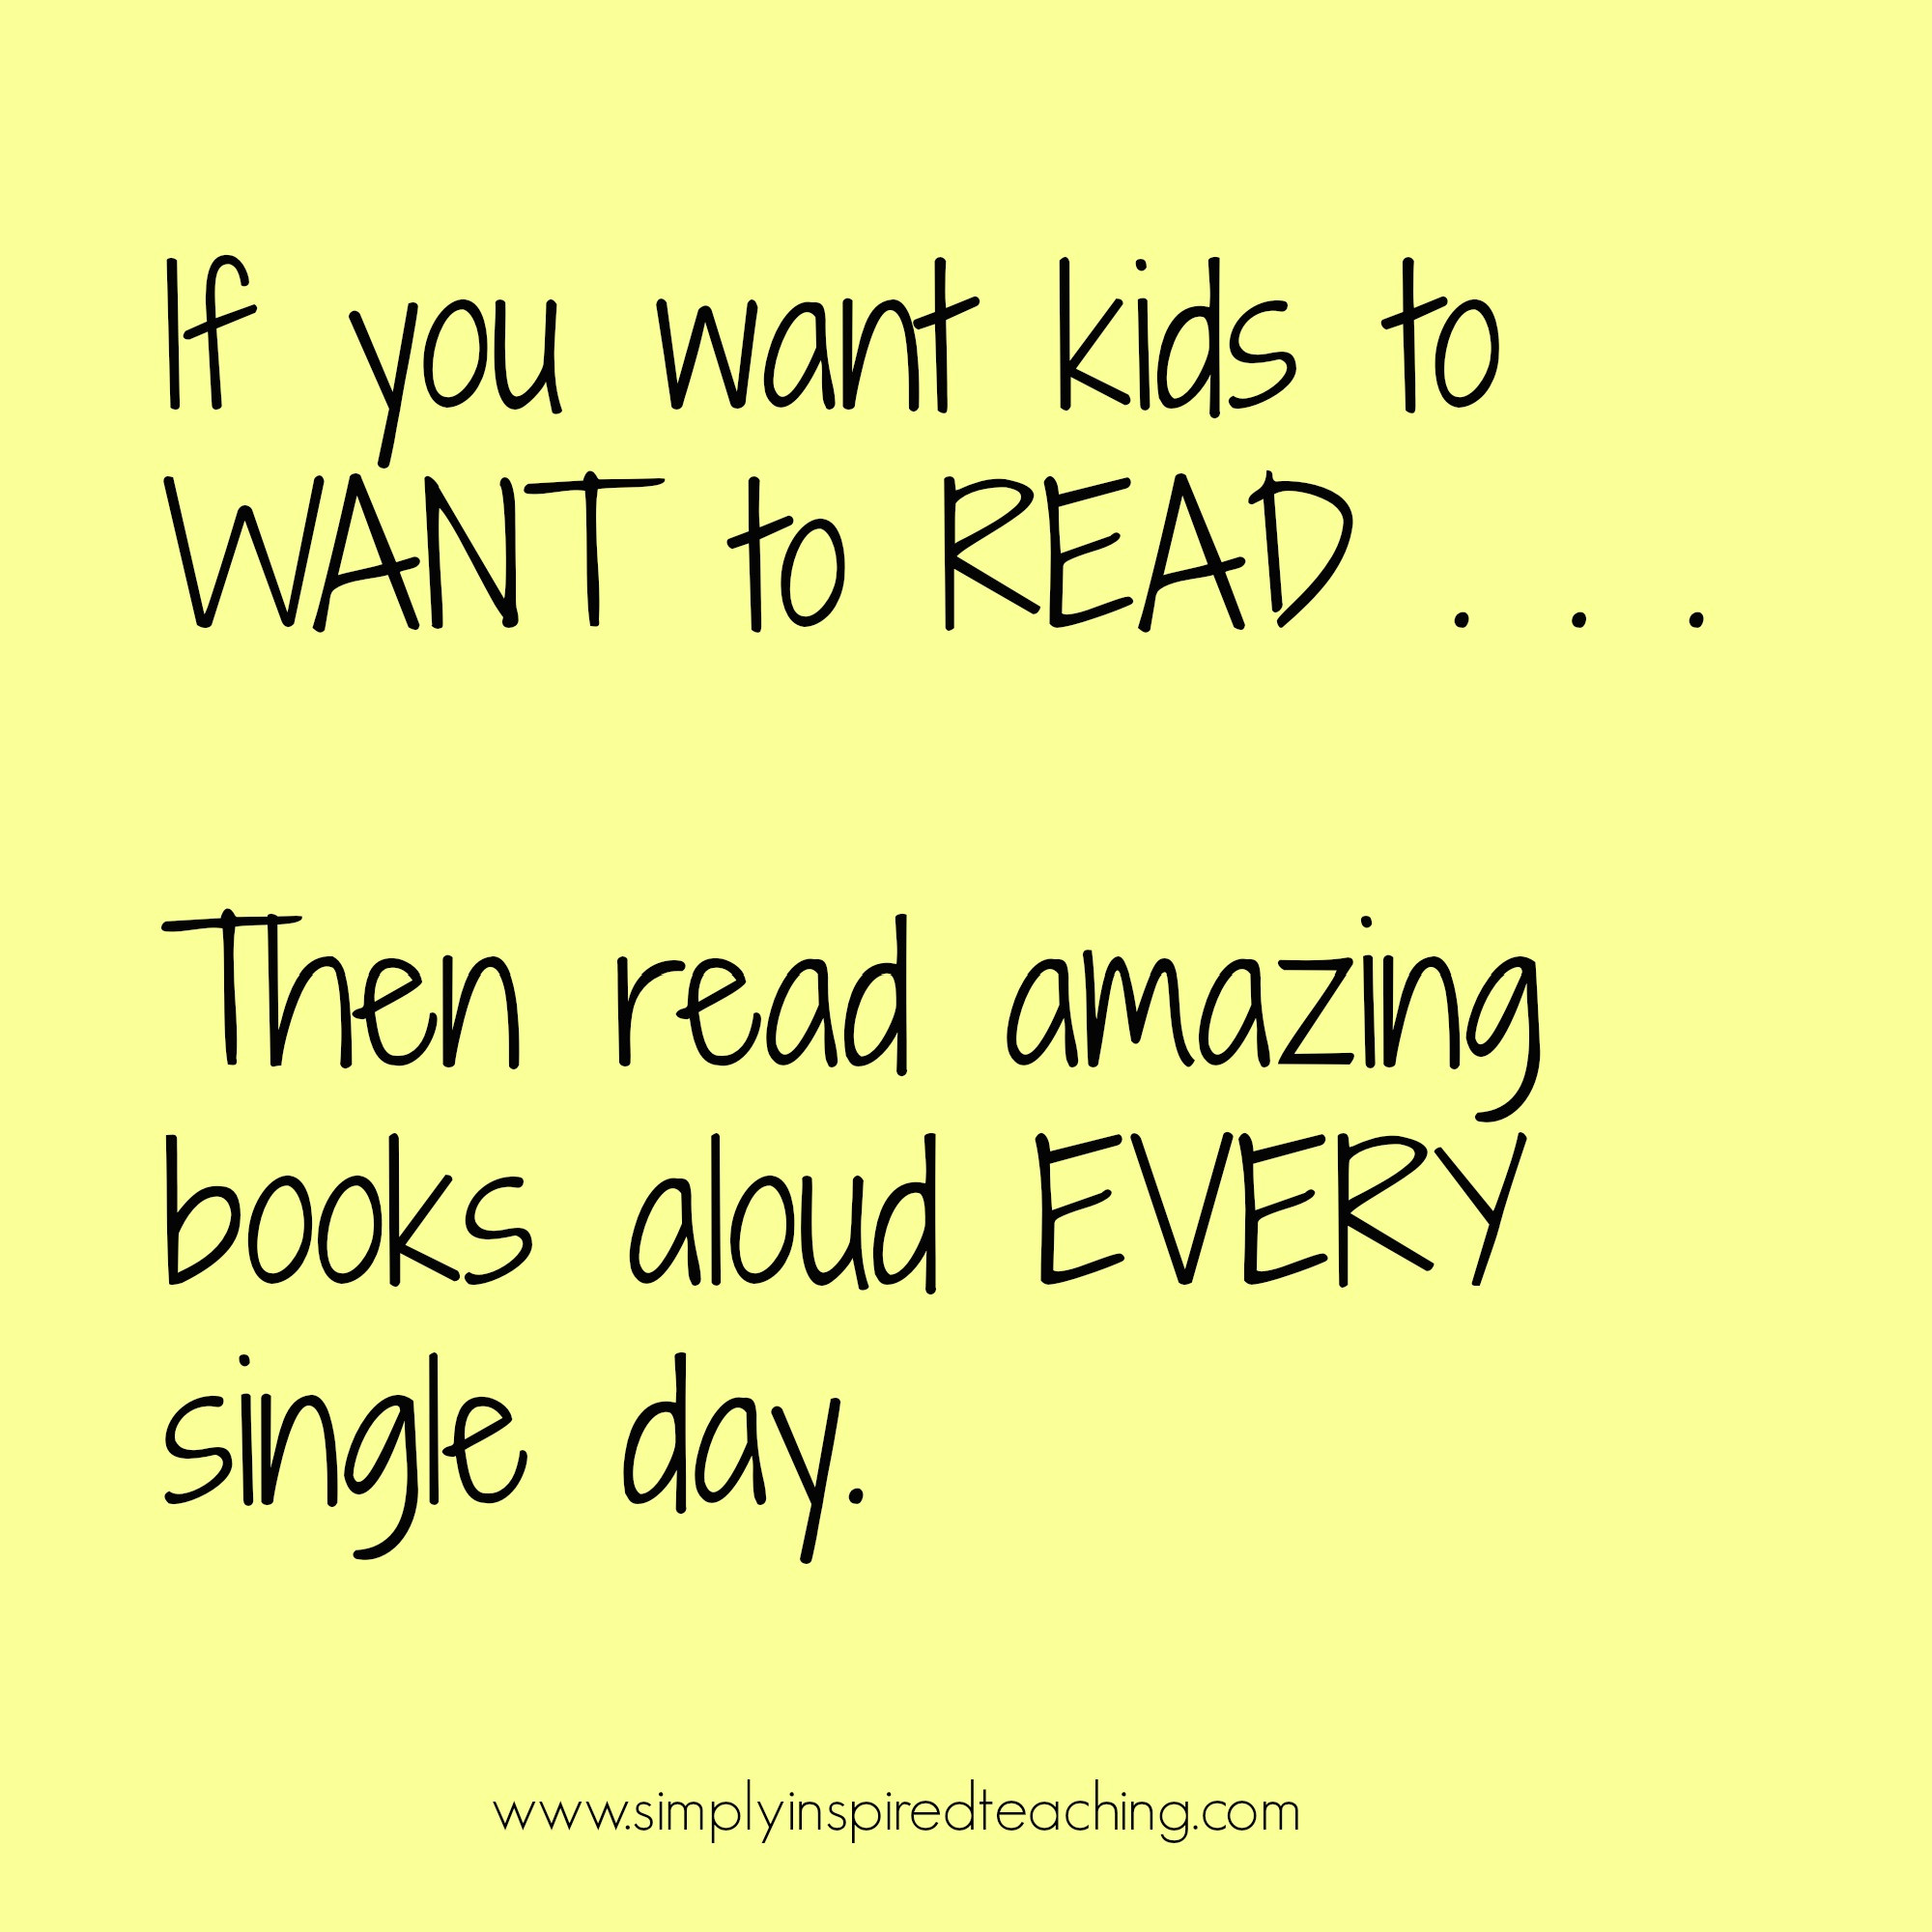 Quotes About Reading To Kids
 If You Want Kids to Want to Read Then Read Aloud